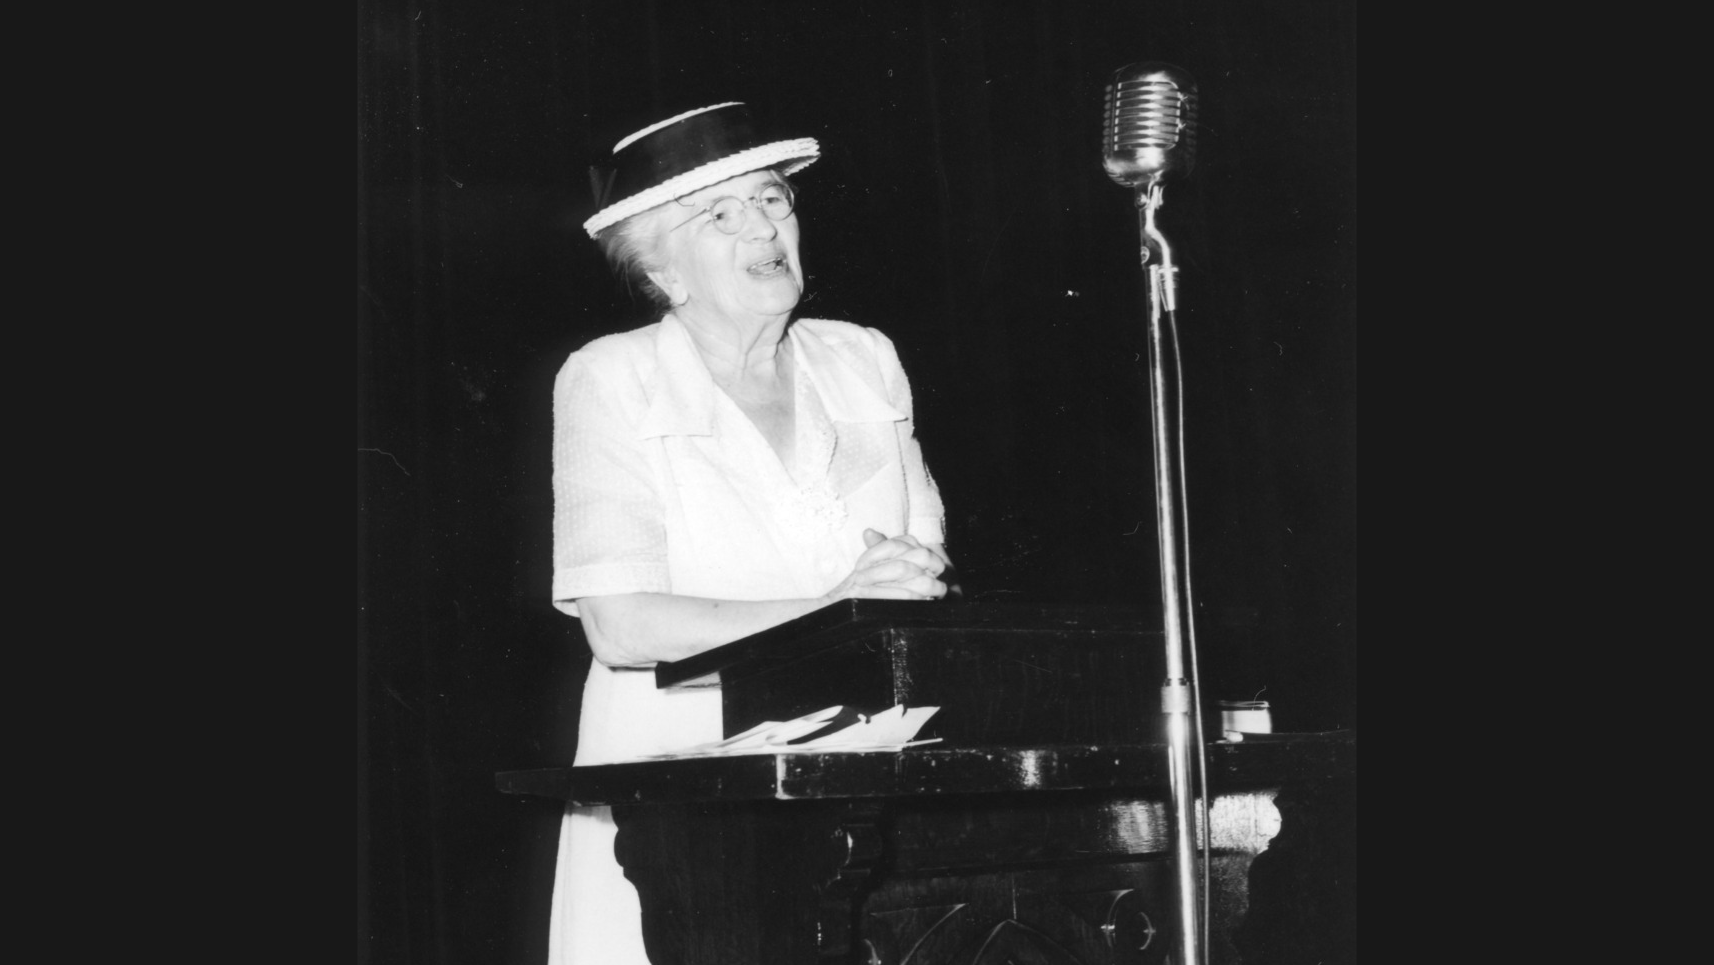 Jane McKimmon stands at the lectern during a conference presentation